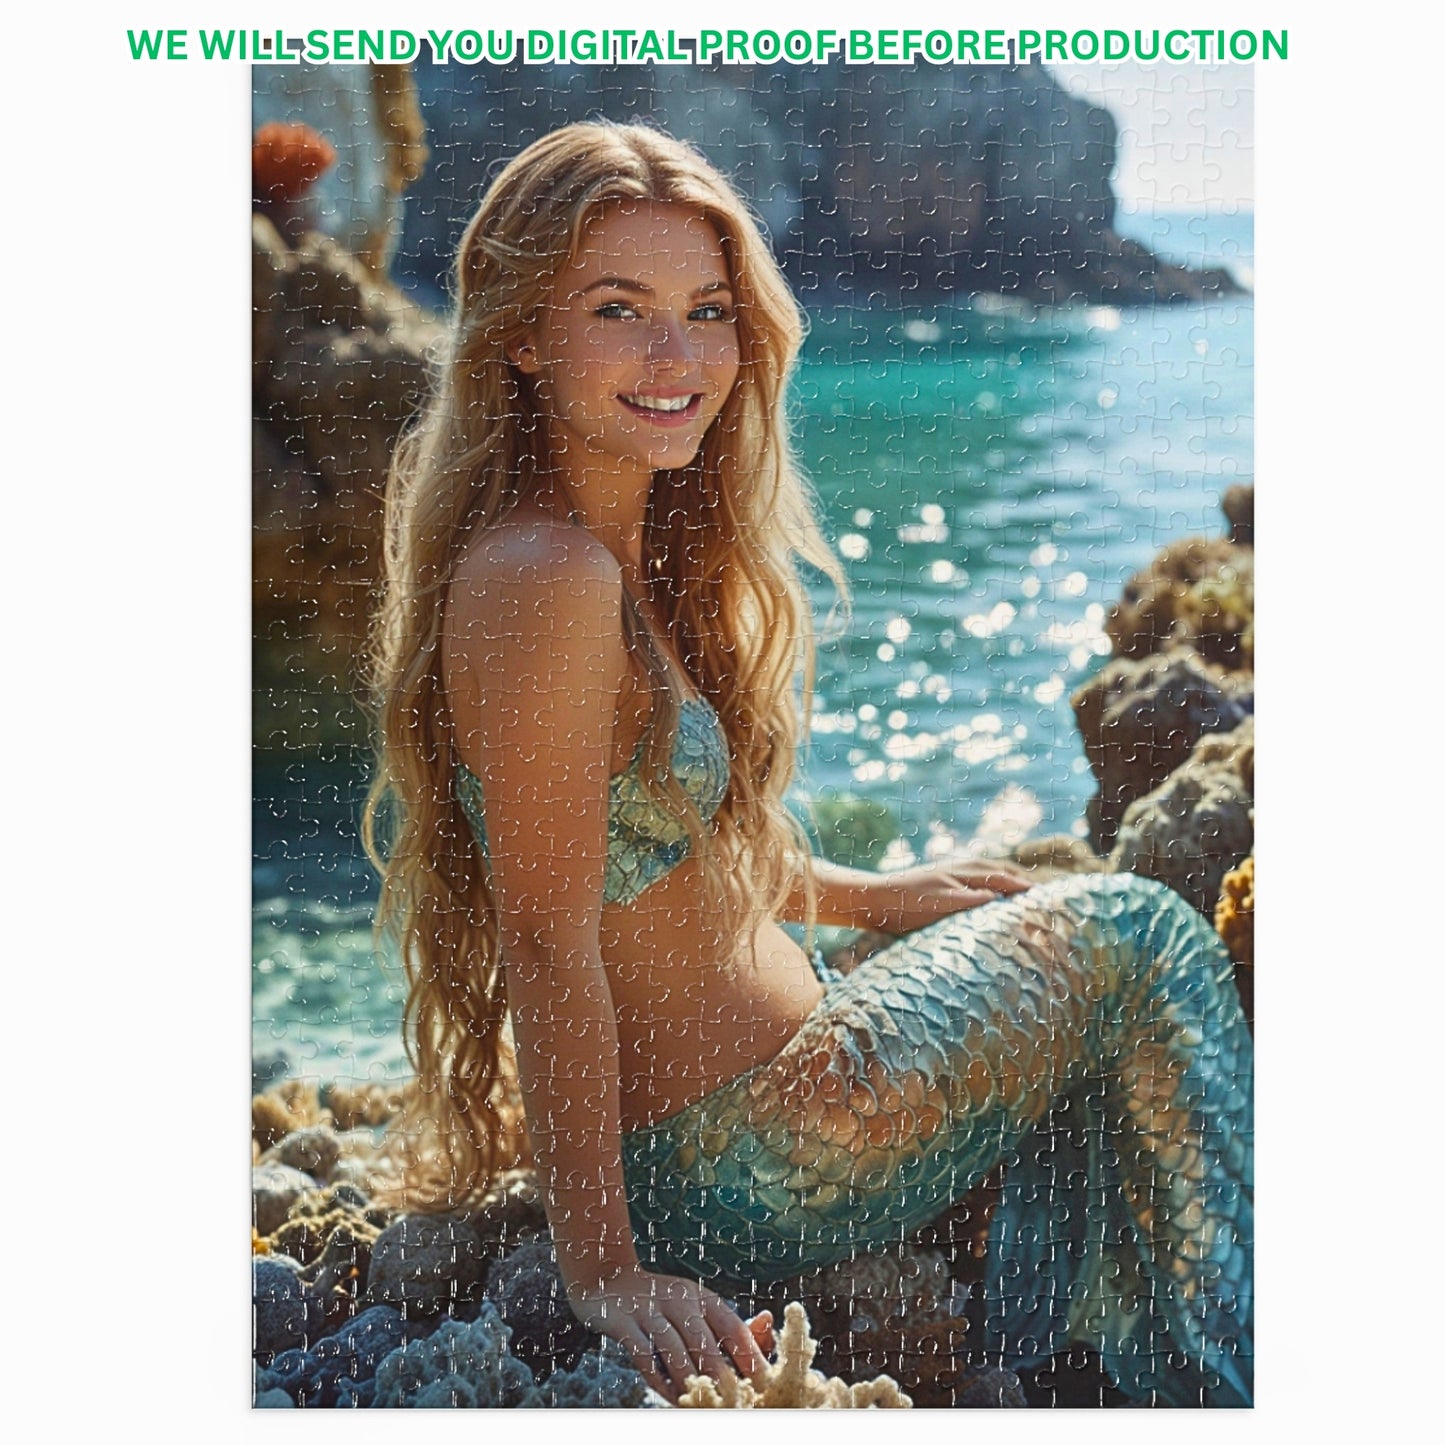 Transform cherished memories into a custom mermaid puzzle! Personalize your puzzle with a princess portrait for a unique birthday gift. Choose from 250 to 1000 pieces. Lady mermaid gifts, princess gifts, and mermaid photo gifts available. Turn any photo into a custom mermaid art puzzle. Ideal for mermaid and princess enthusiasts. Order your personalized puzzle today!